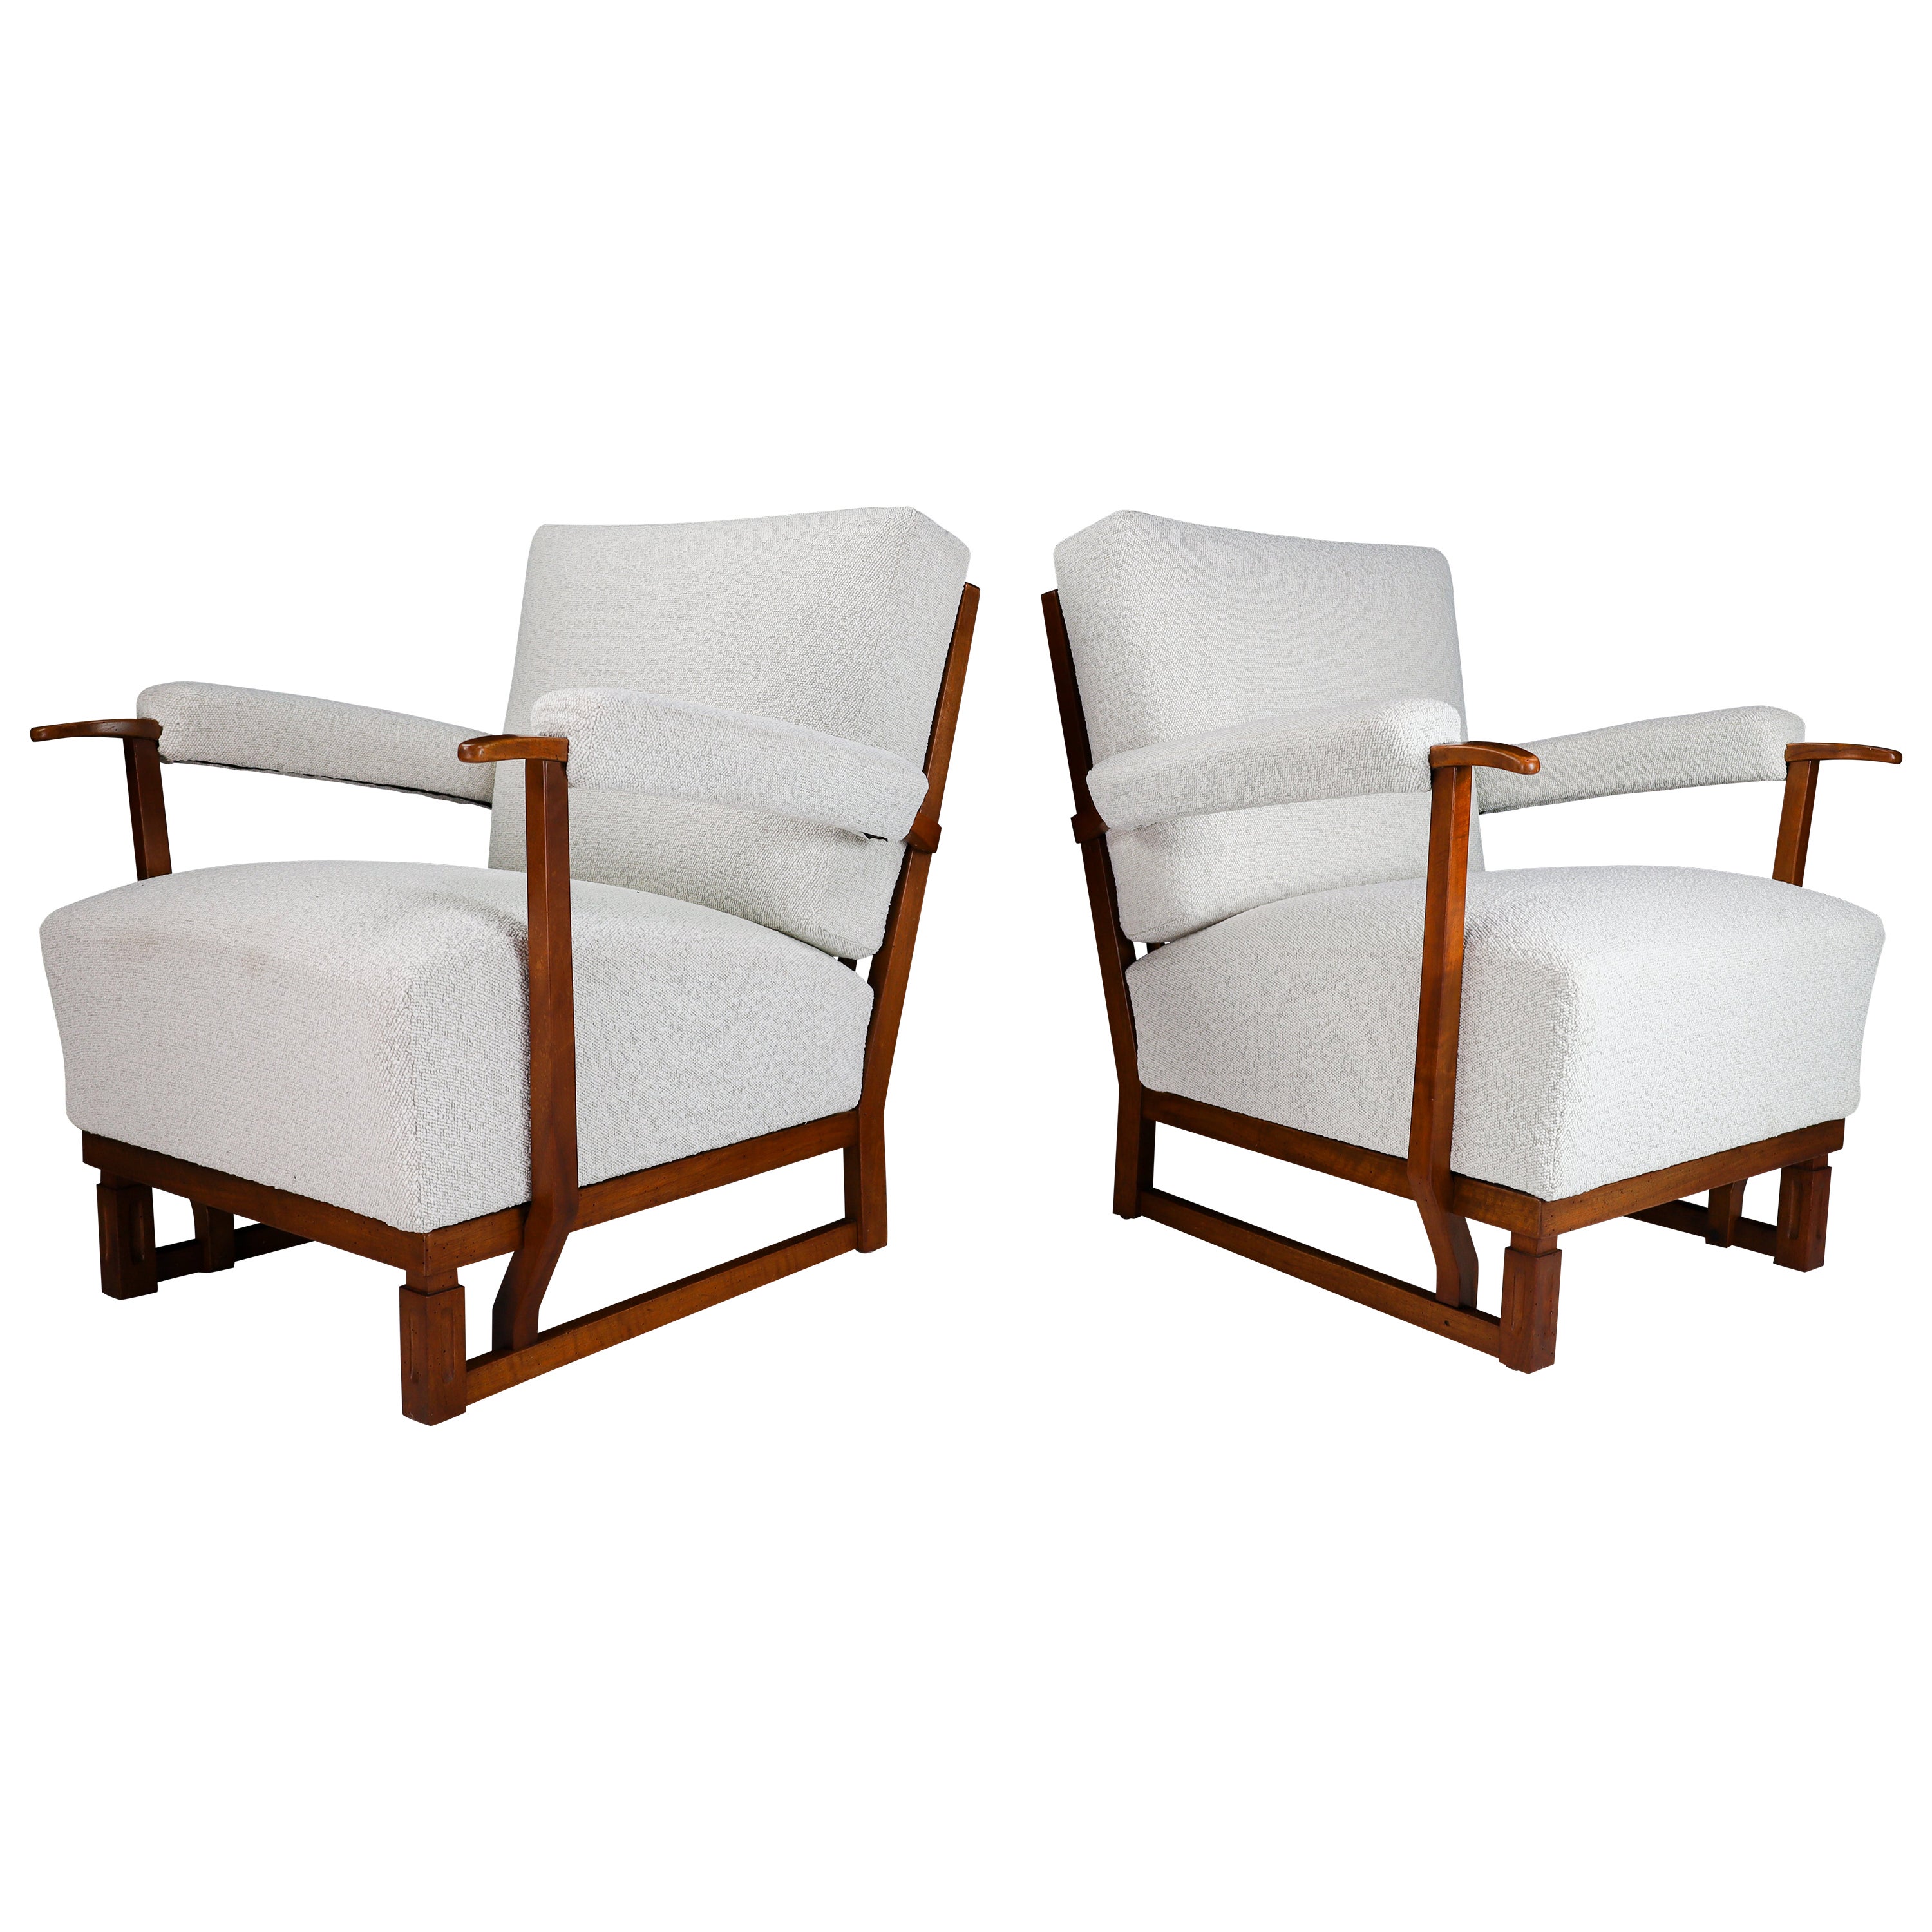 Art Deco Lounge Chairs in Oak & Reupholstered in Bouclé Fabric France '40s For Sale